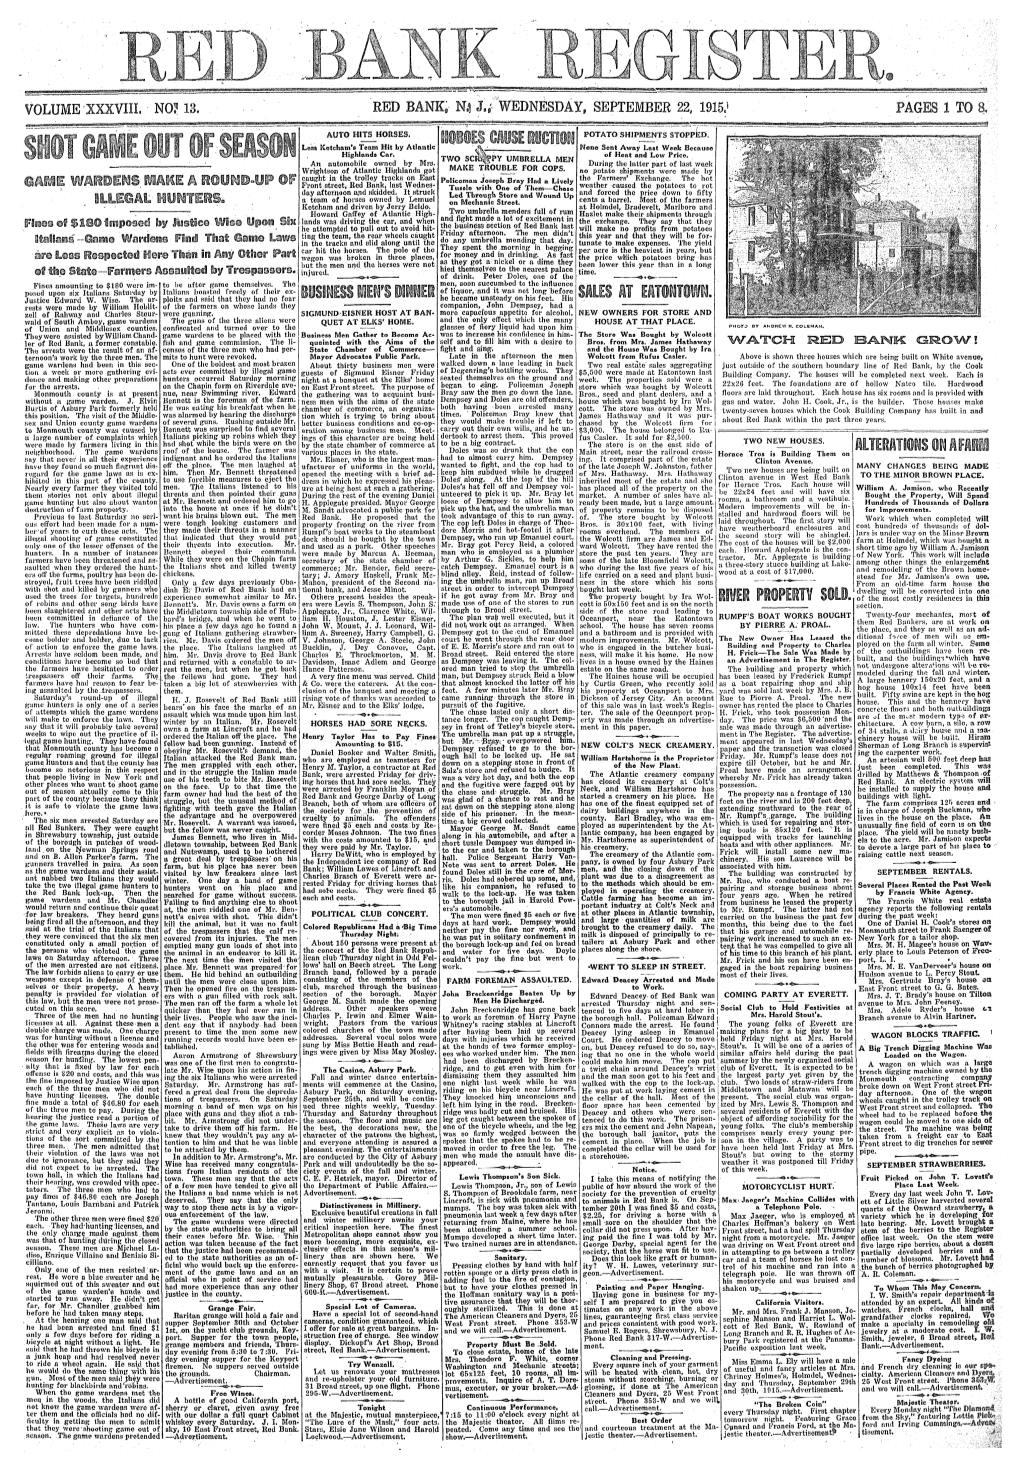 13. RED BANK, N.1 J.F'wedntisday, SEPTEMBER 22, 1915.' PAGES 1 to 8